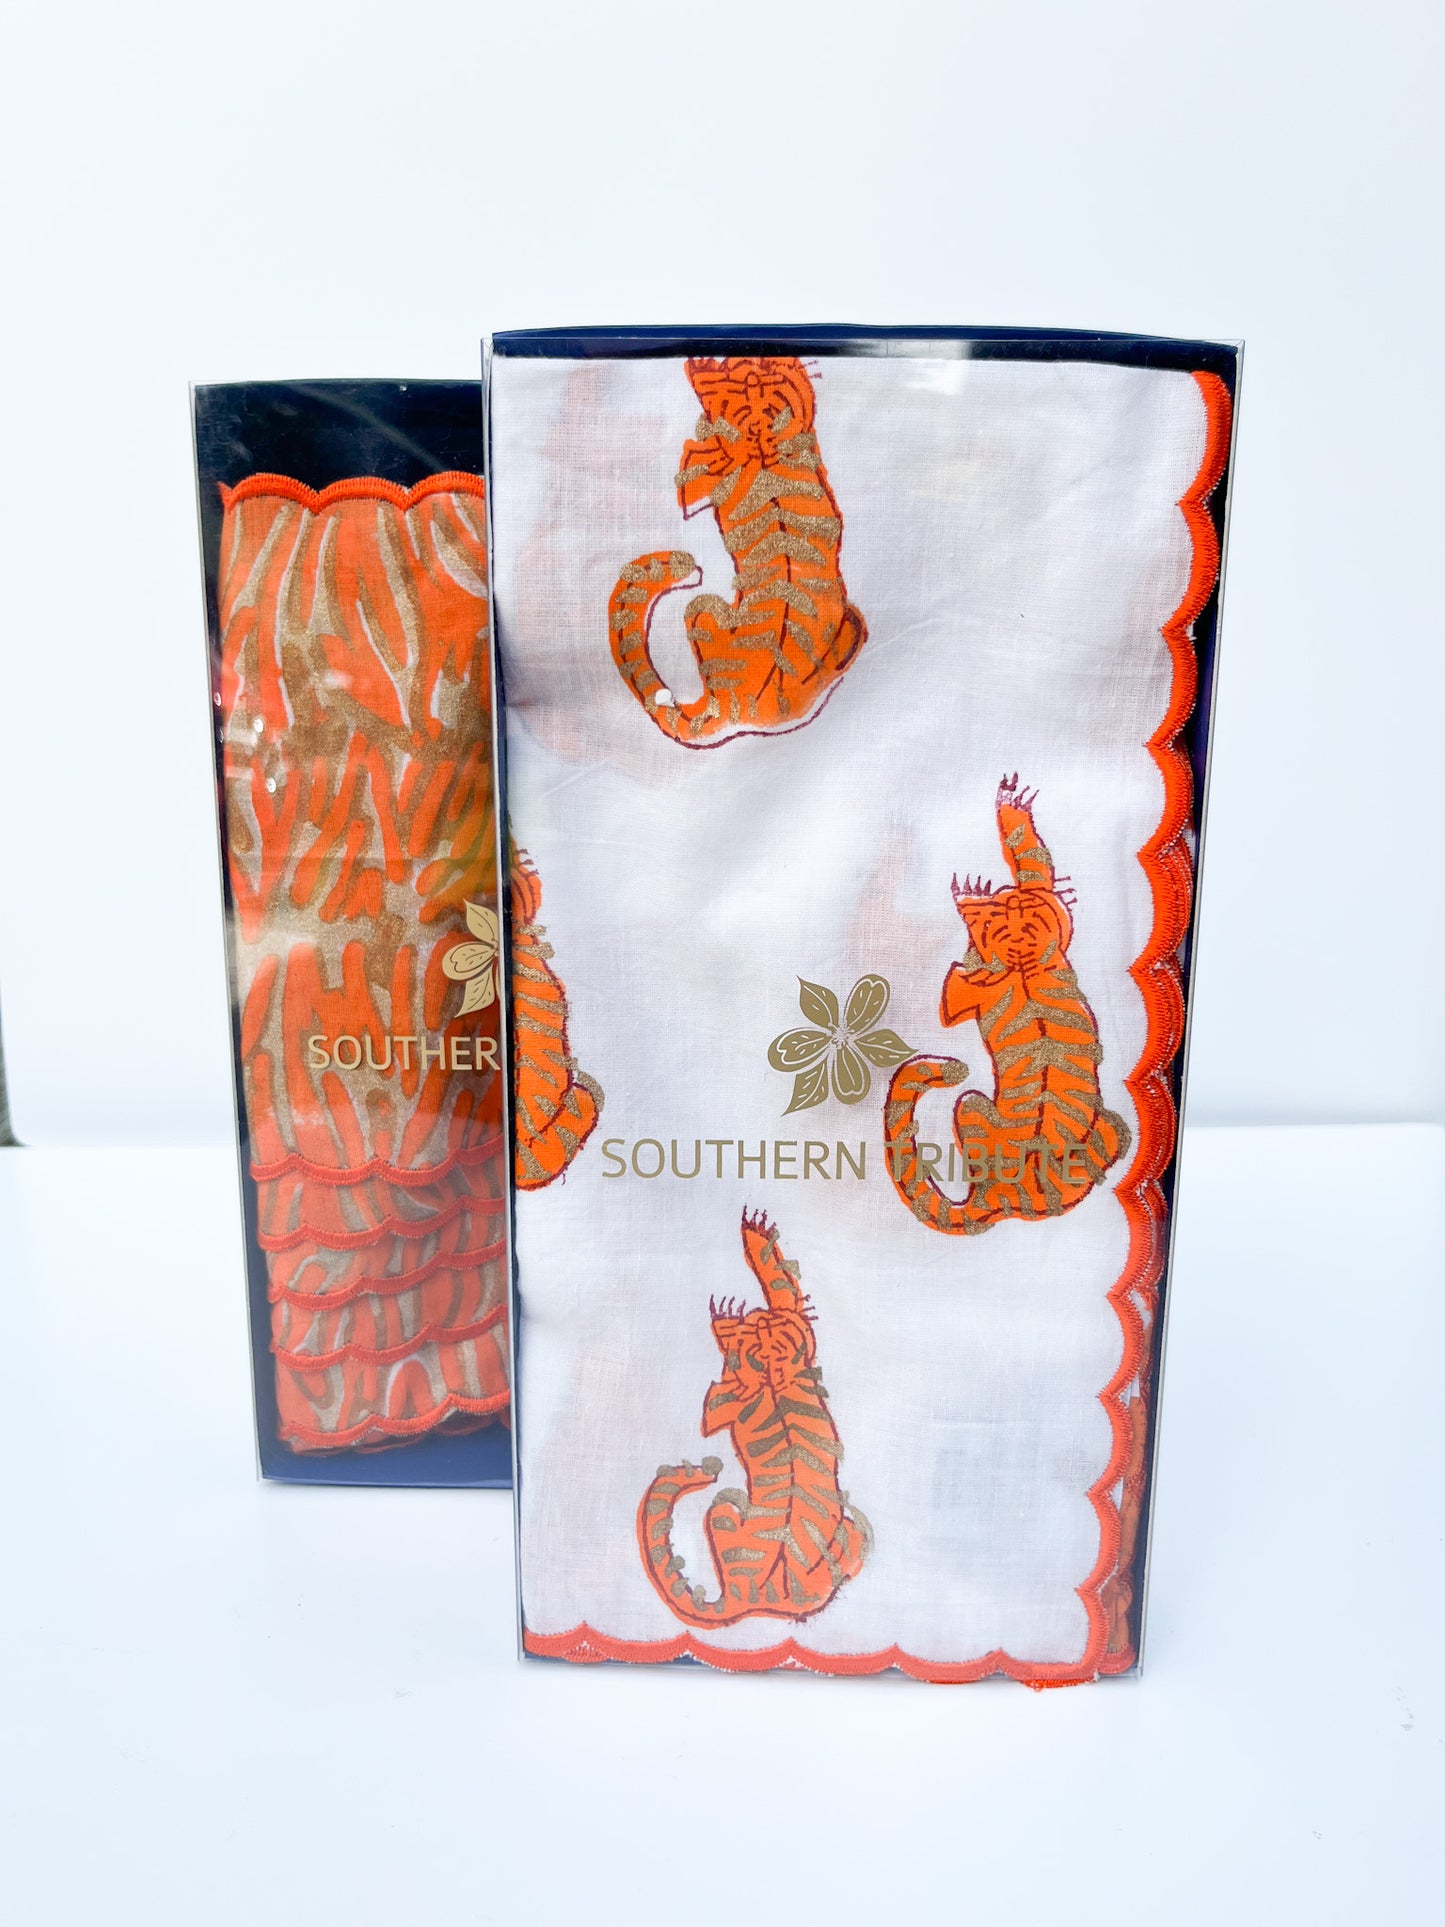 Southern Tribute Cloth Dinner Napkins